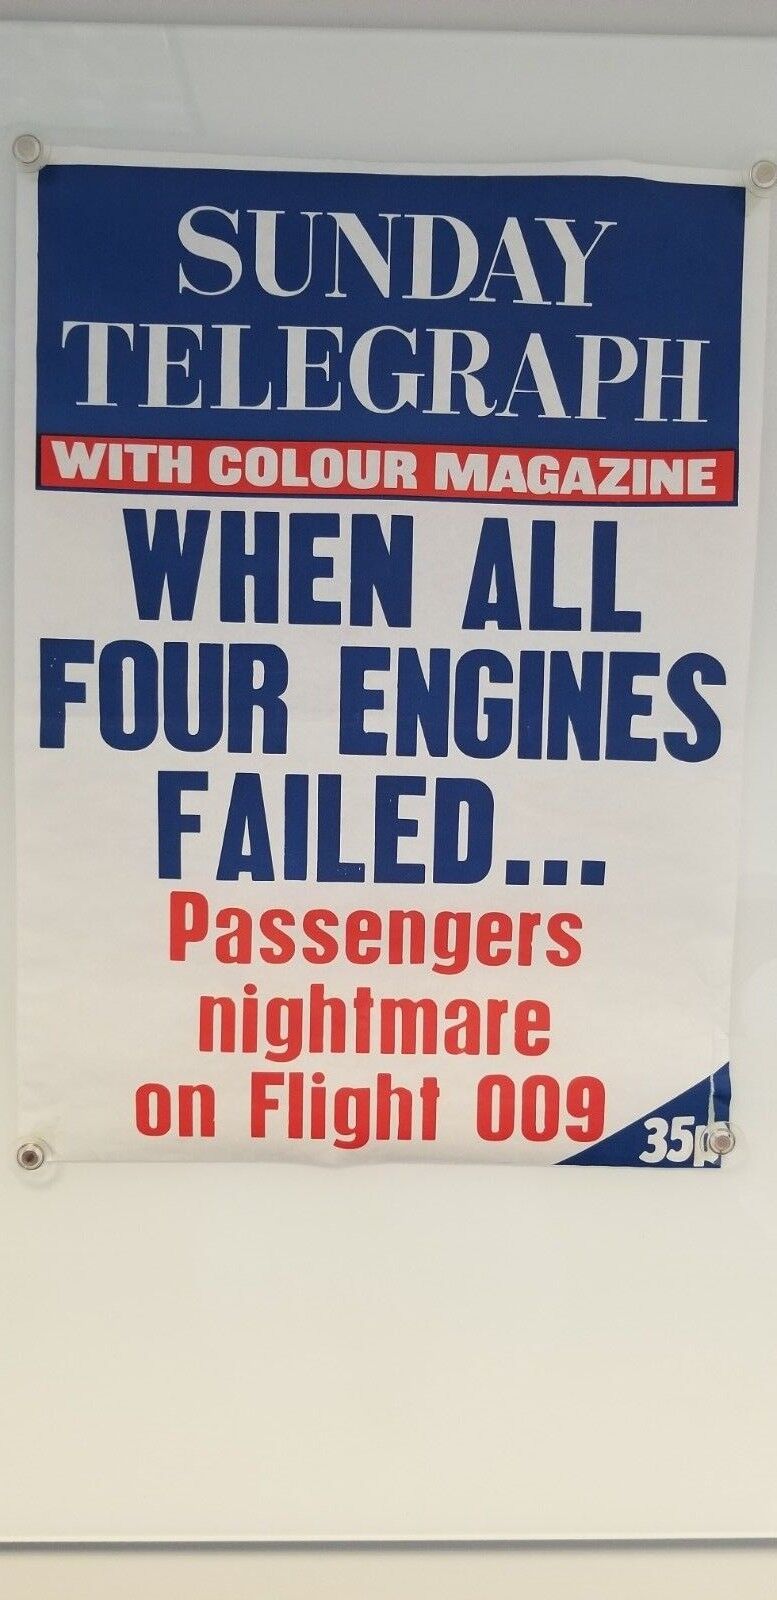 Sunday Telegraph Poster - When All Four Engines Failed -  British Air 009